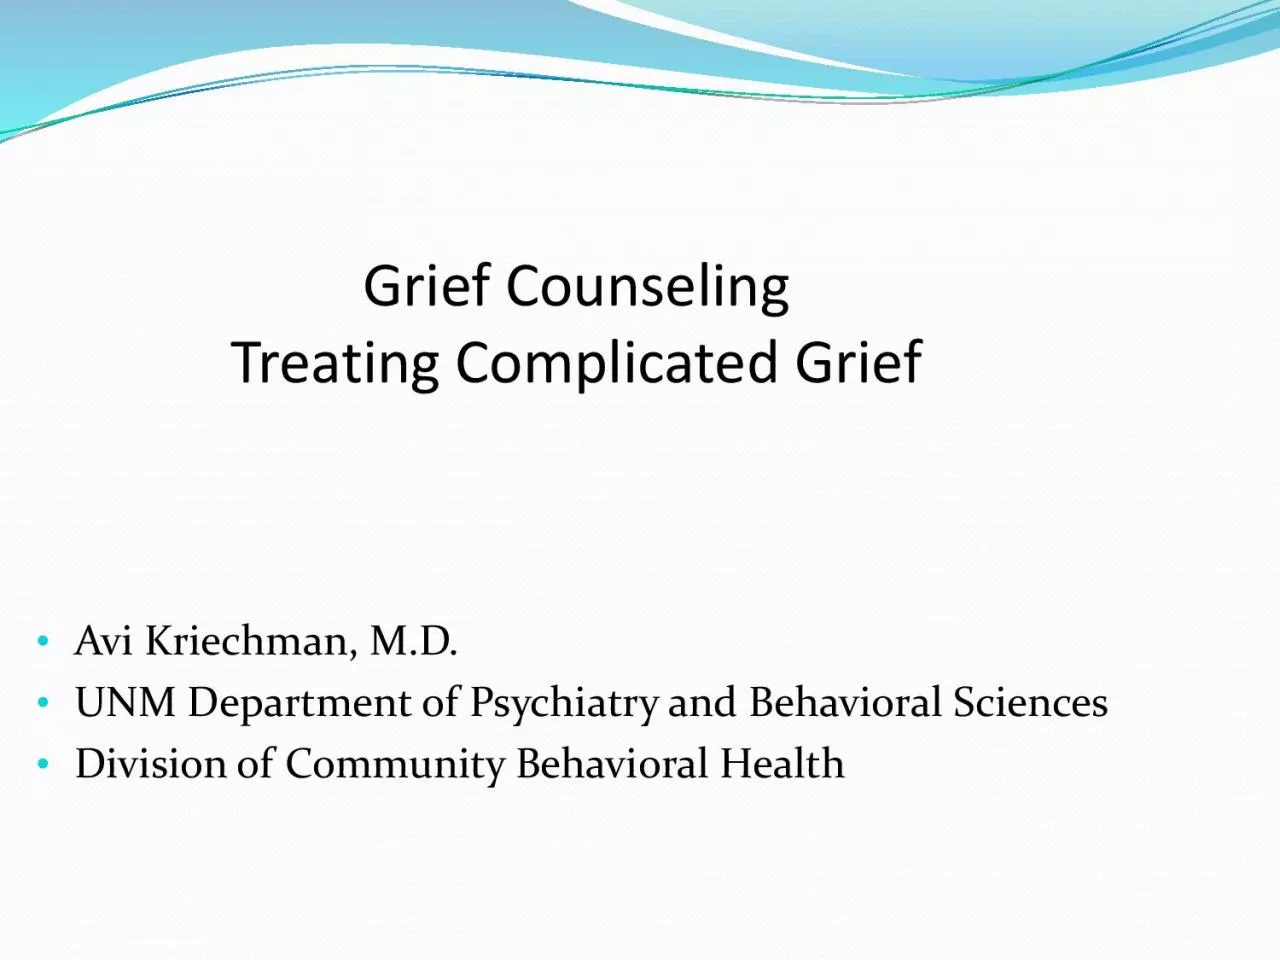 Grief CounselingTreating Complicated Grief